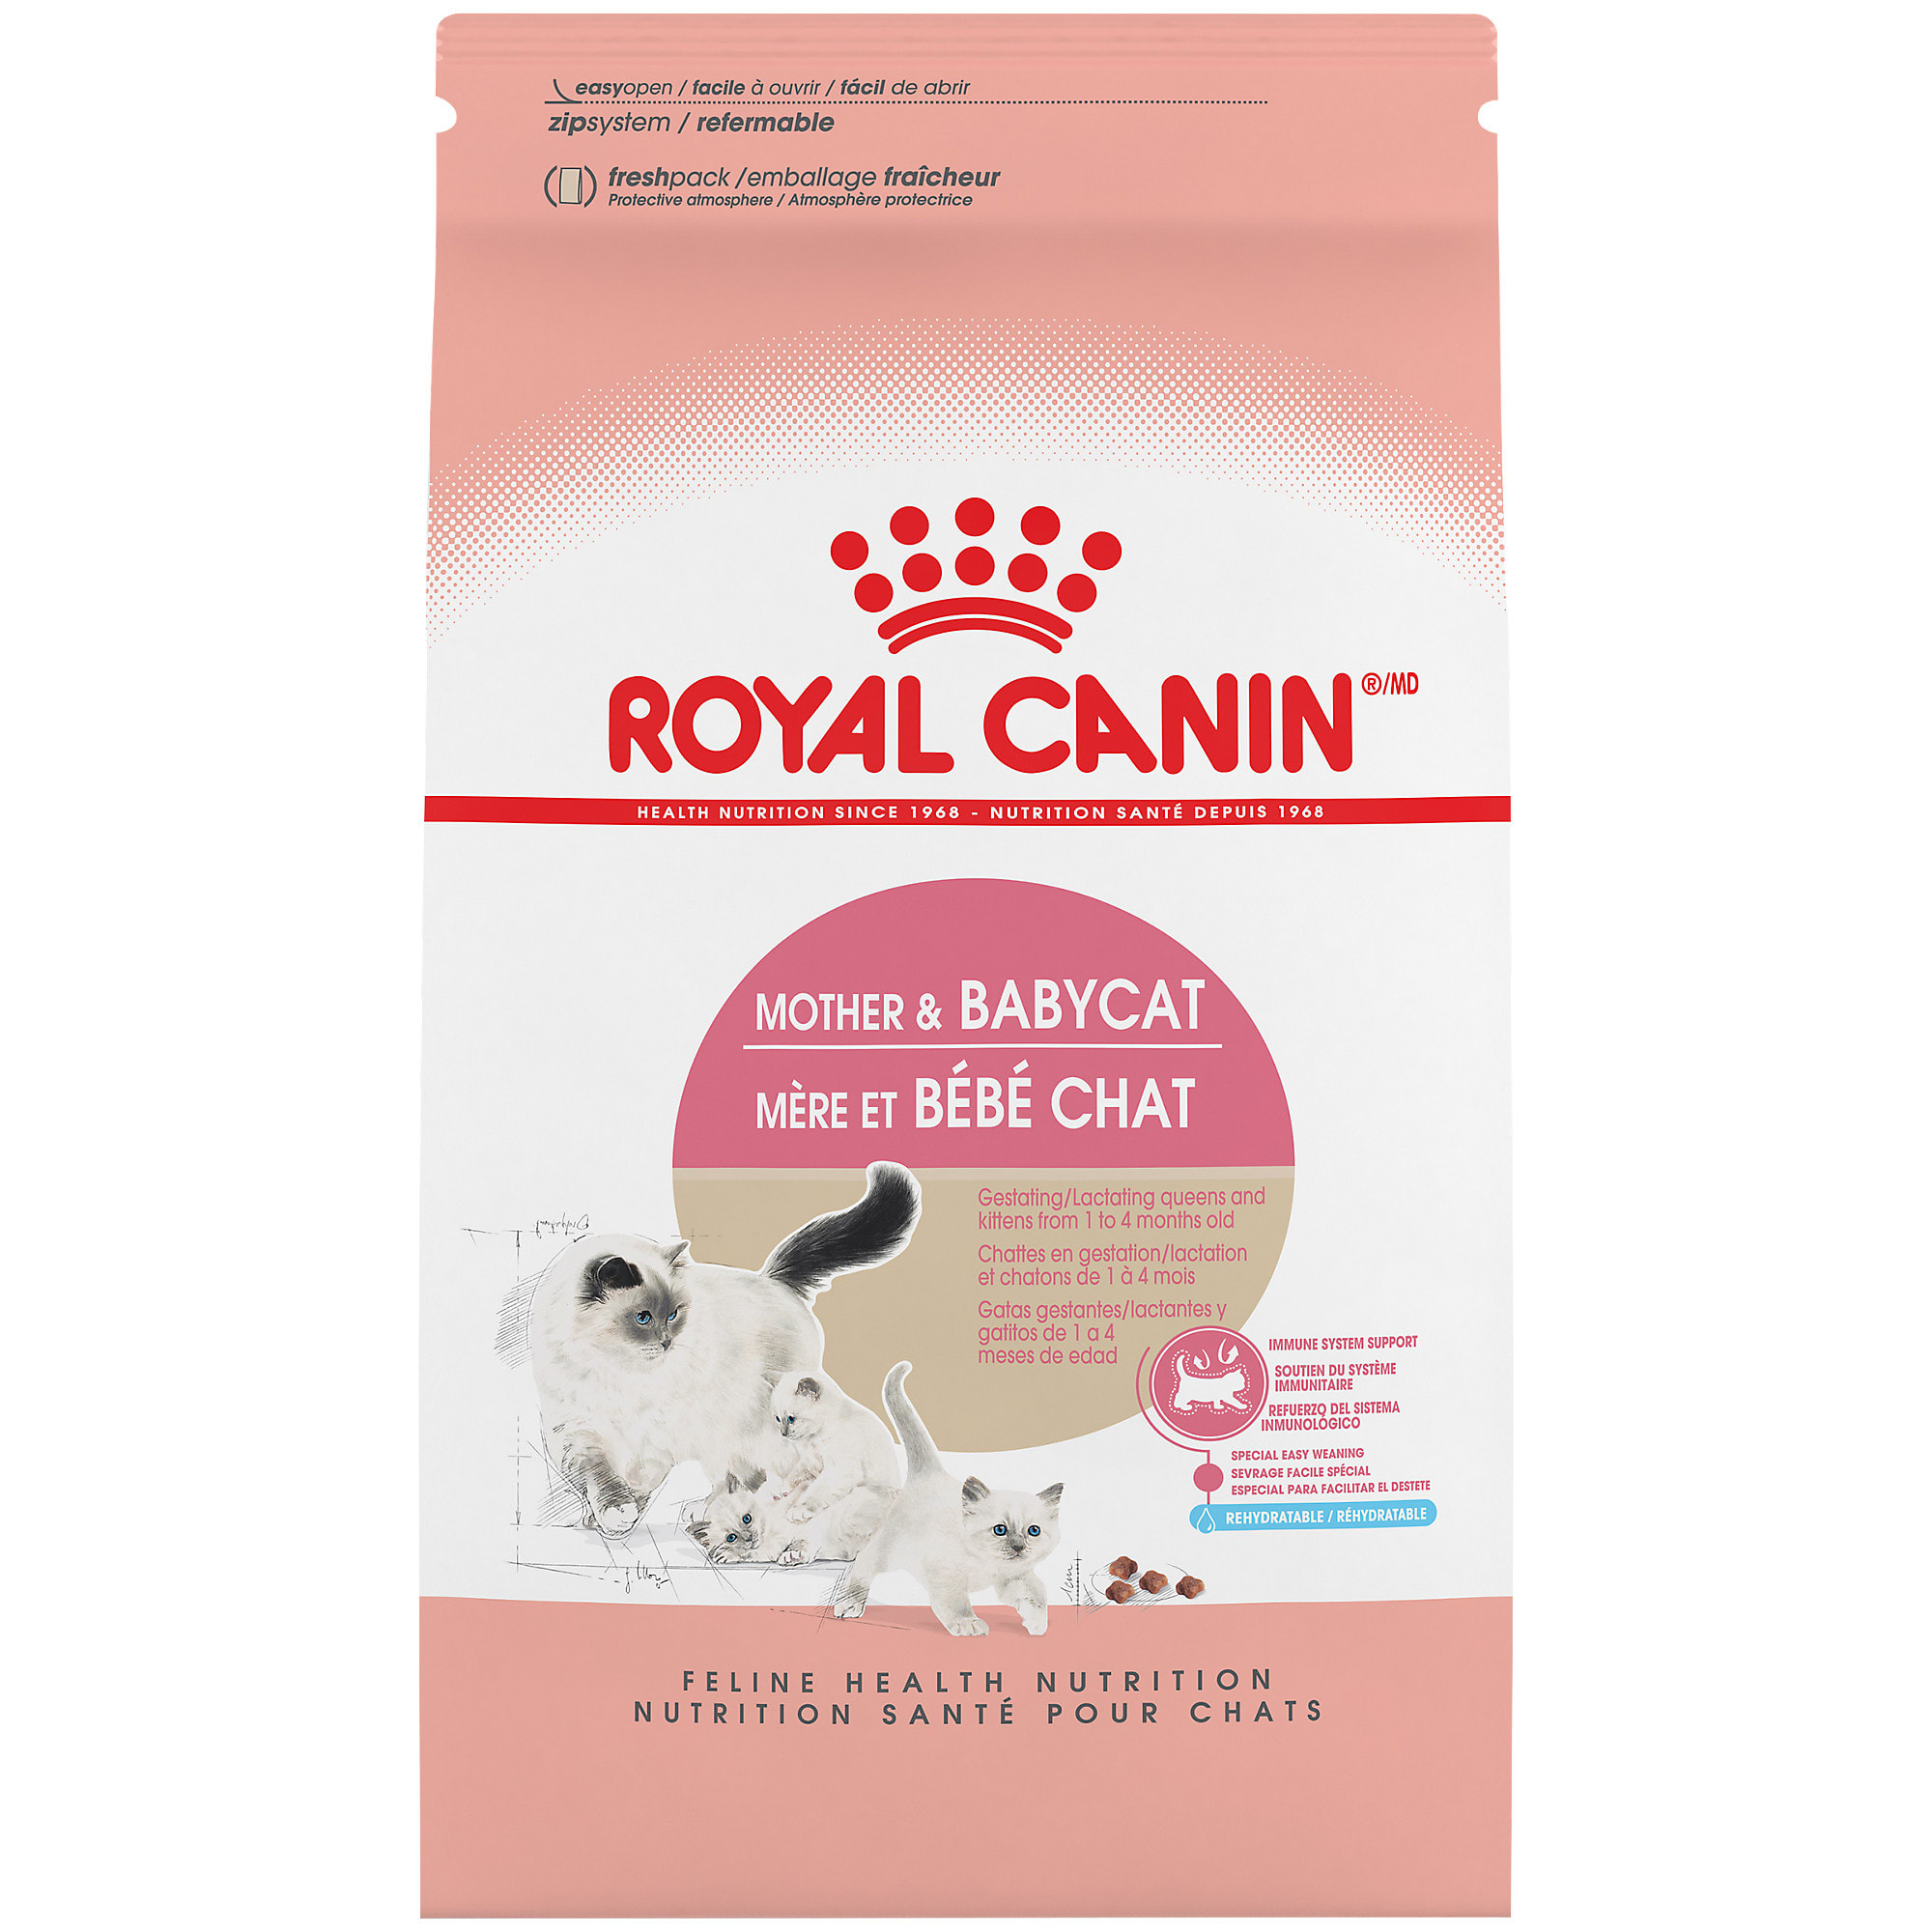 royal canin cat products